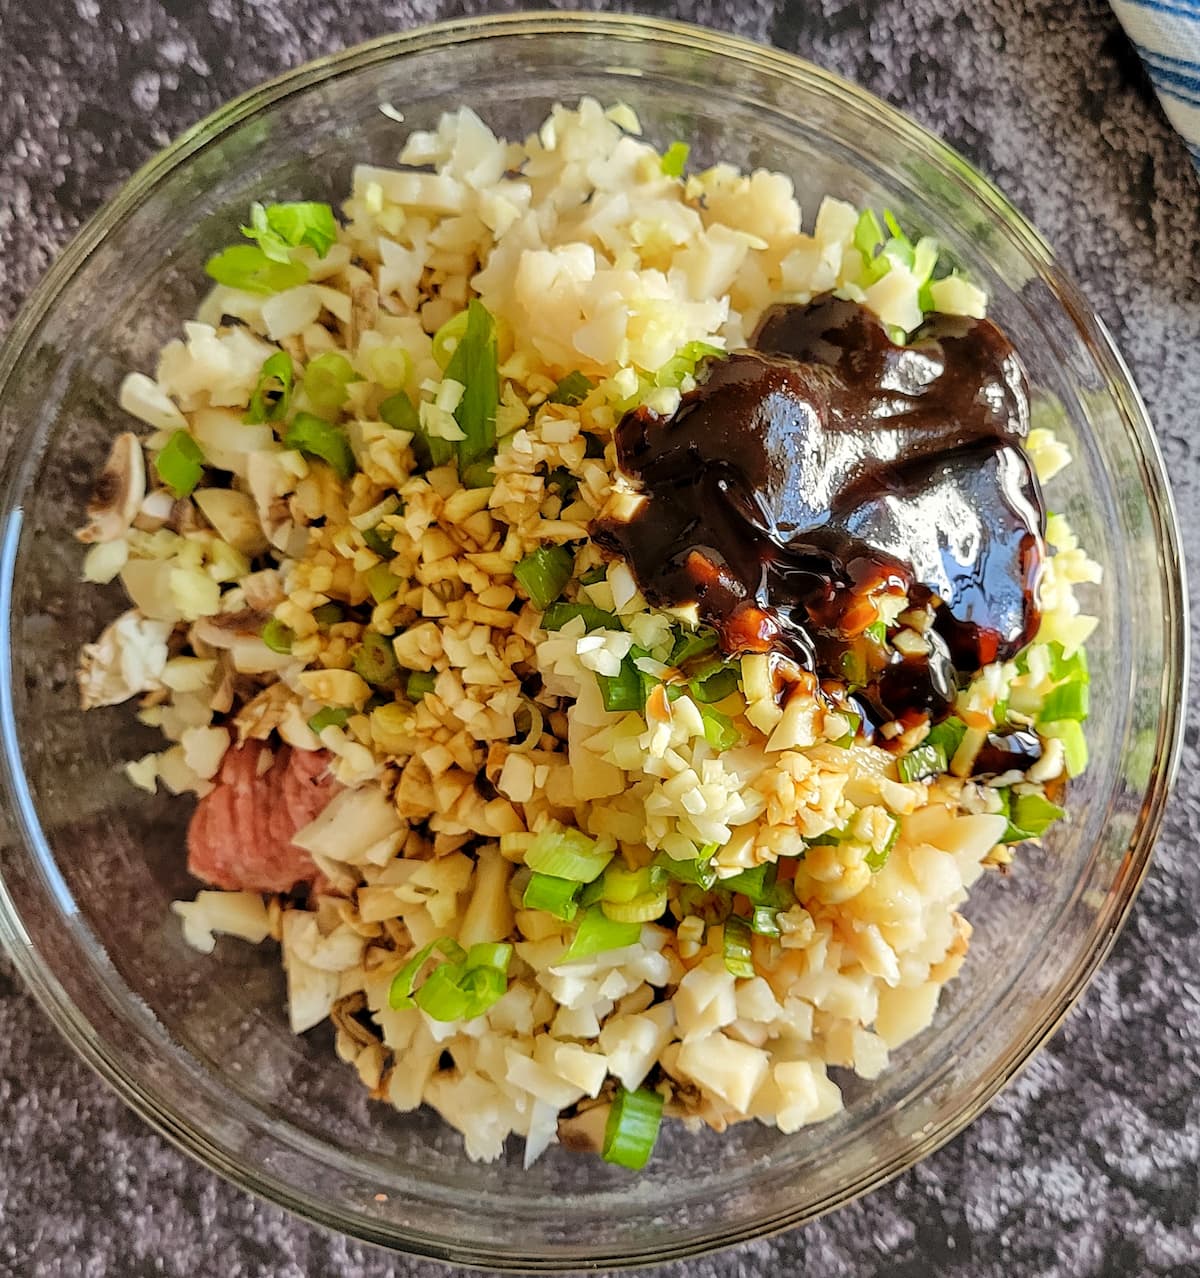 chopped ingredients unmixed in a bowl with a brown sauce